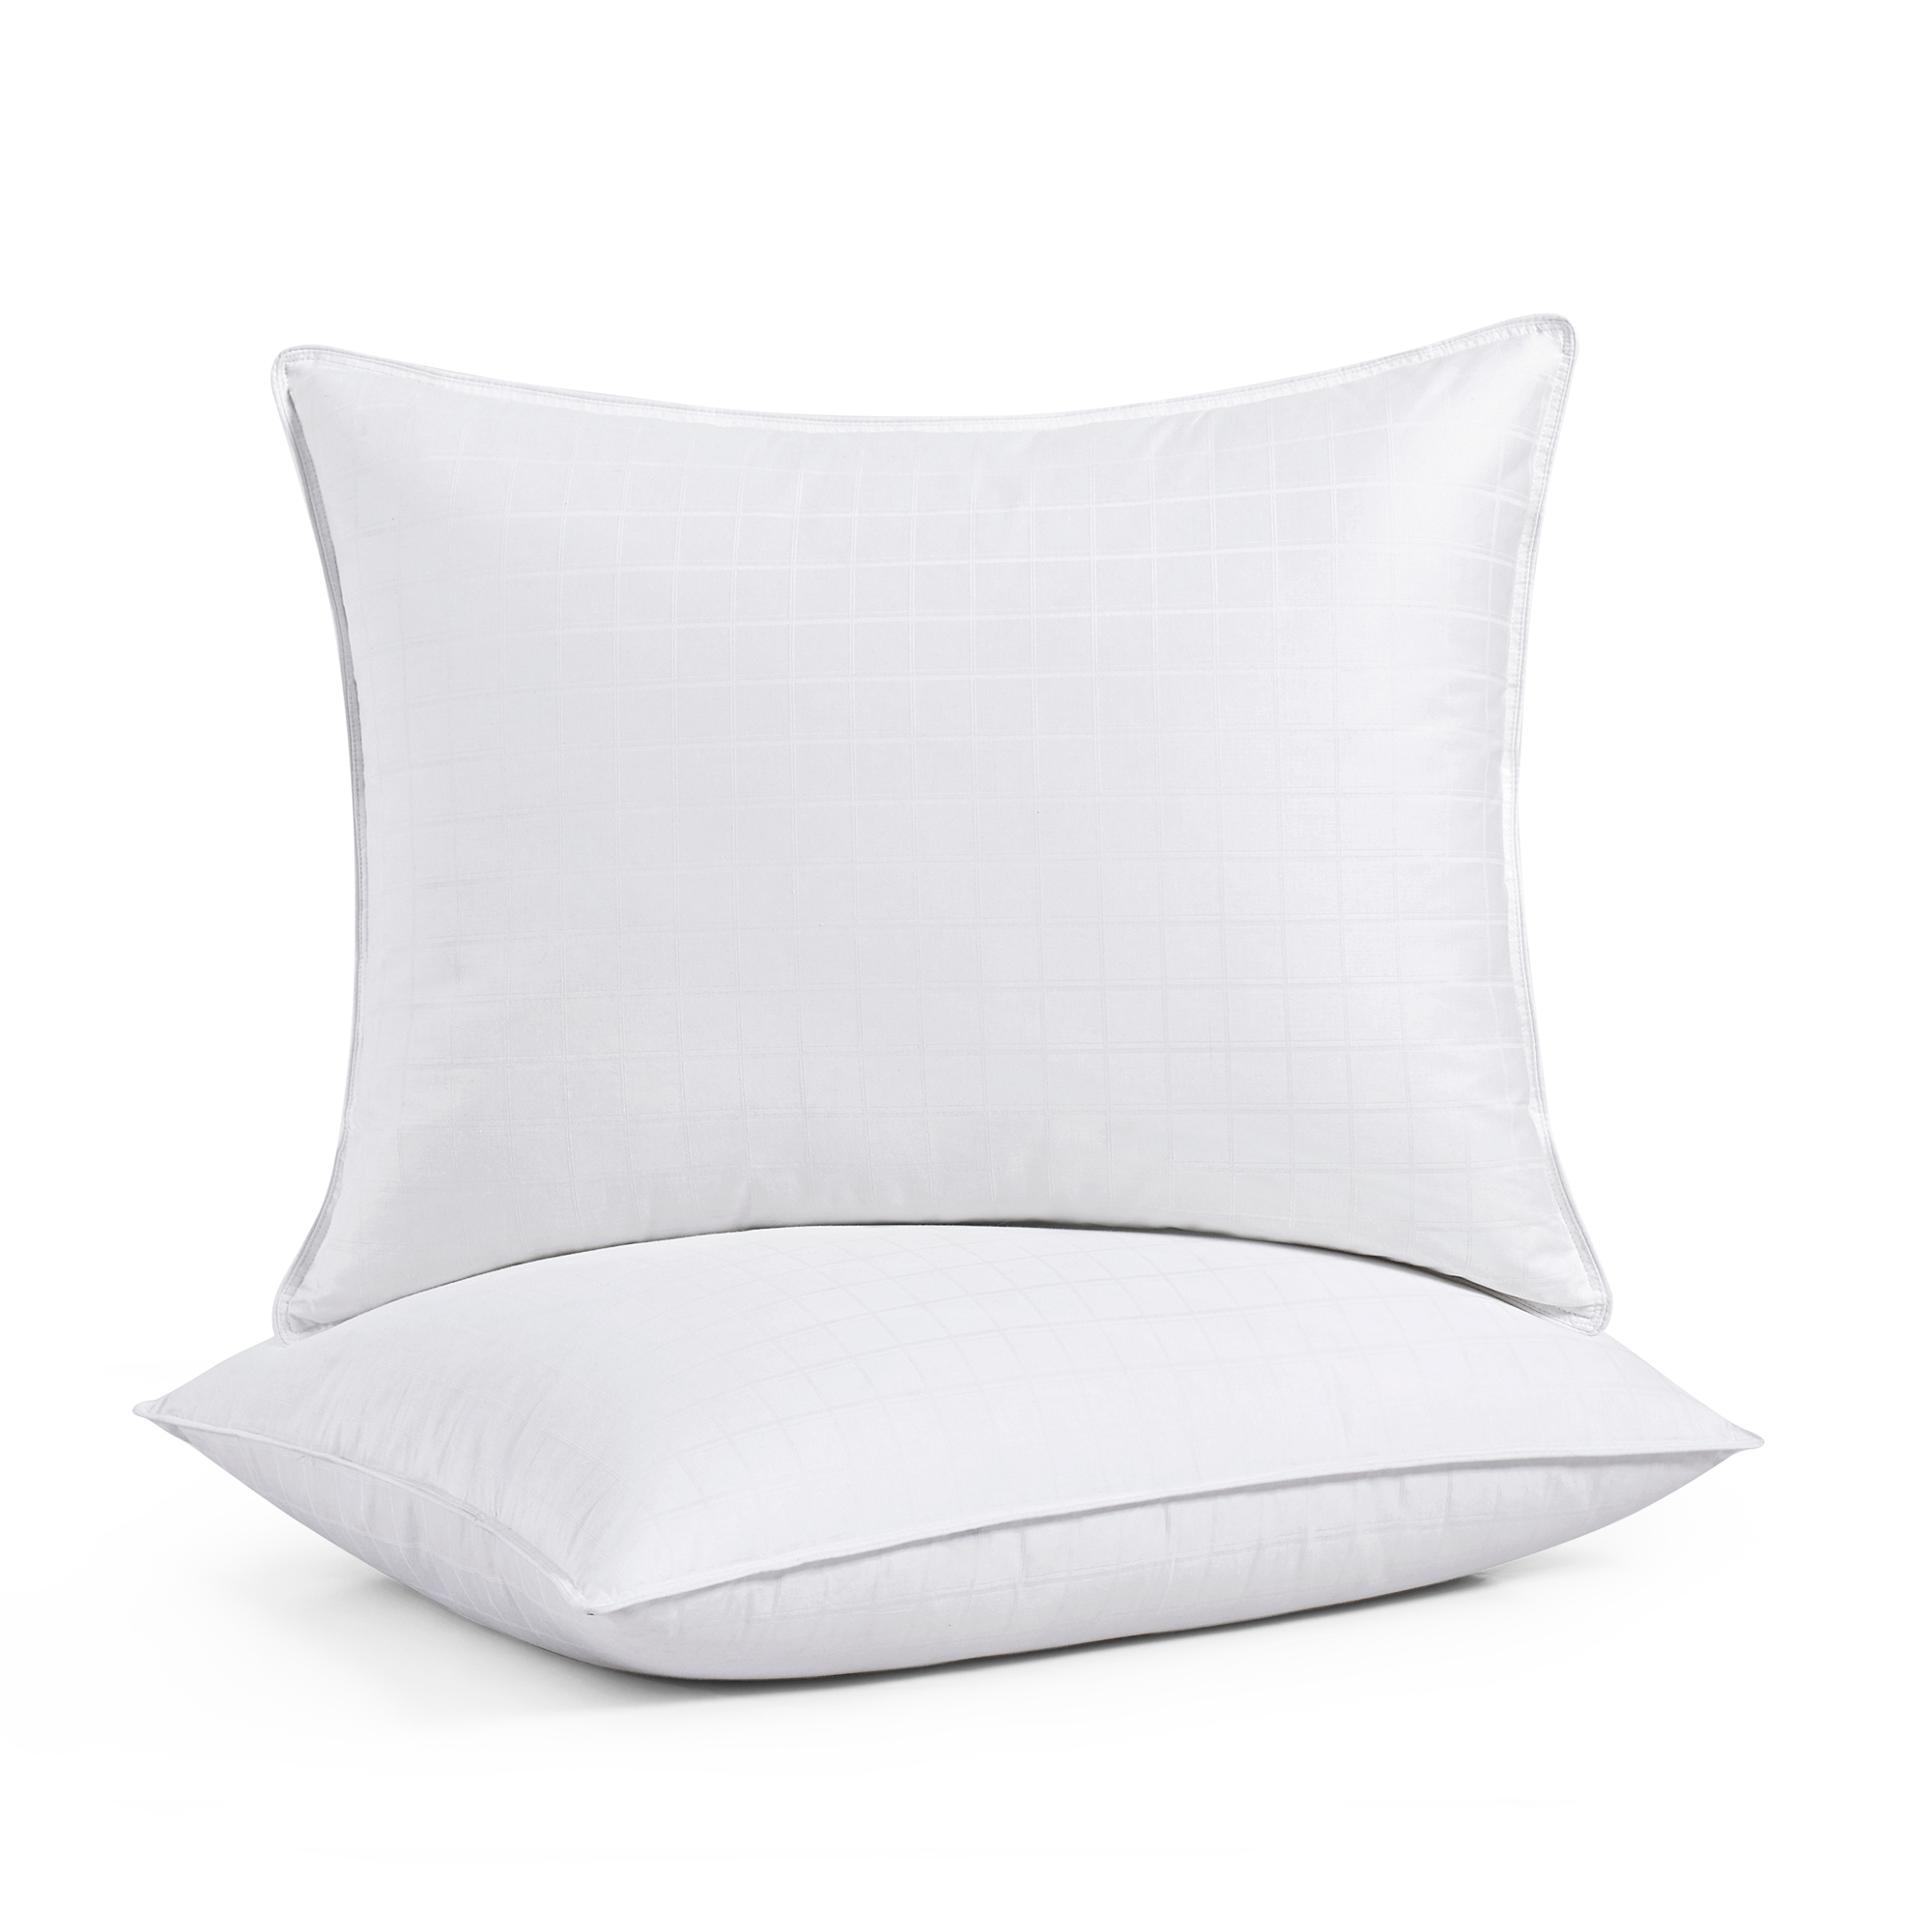 Hotel Luxury Premium White Goose Down Pillow For Sleeping, Pillow-in-a- Pillow Design, Cotton Fabric, Side And Back Sleepers, Set Of 2 - Que